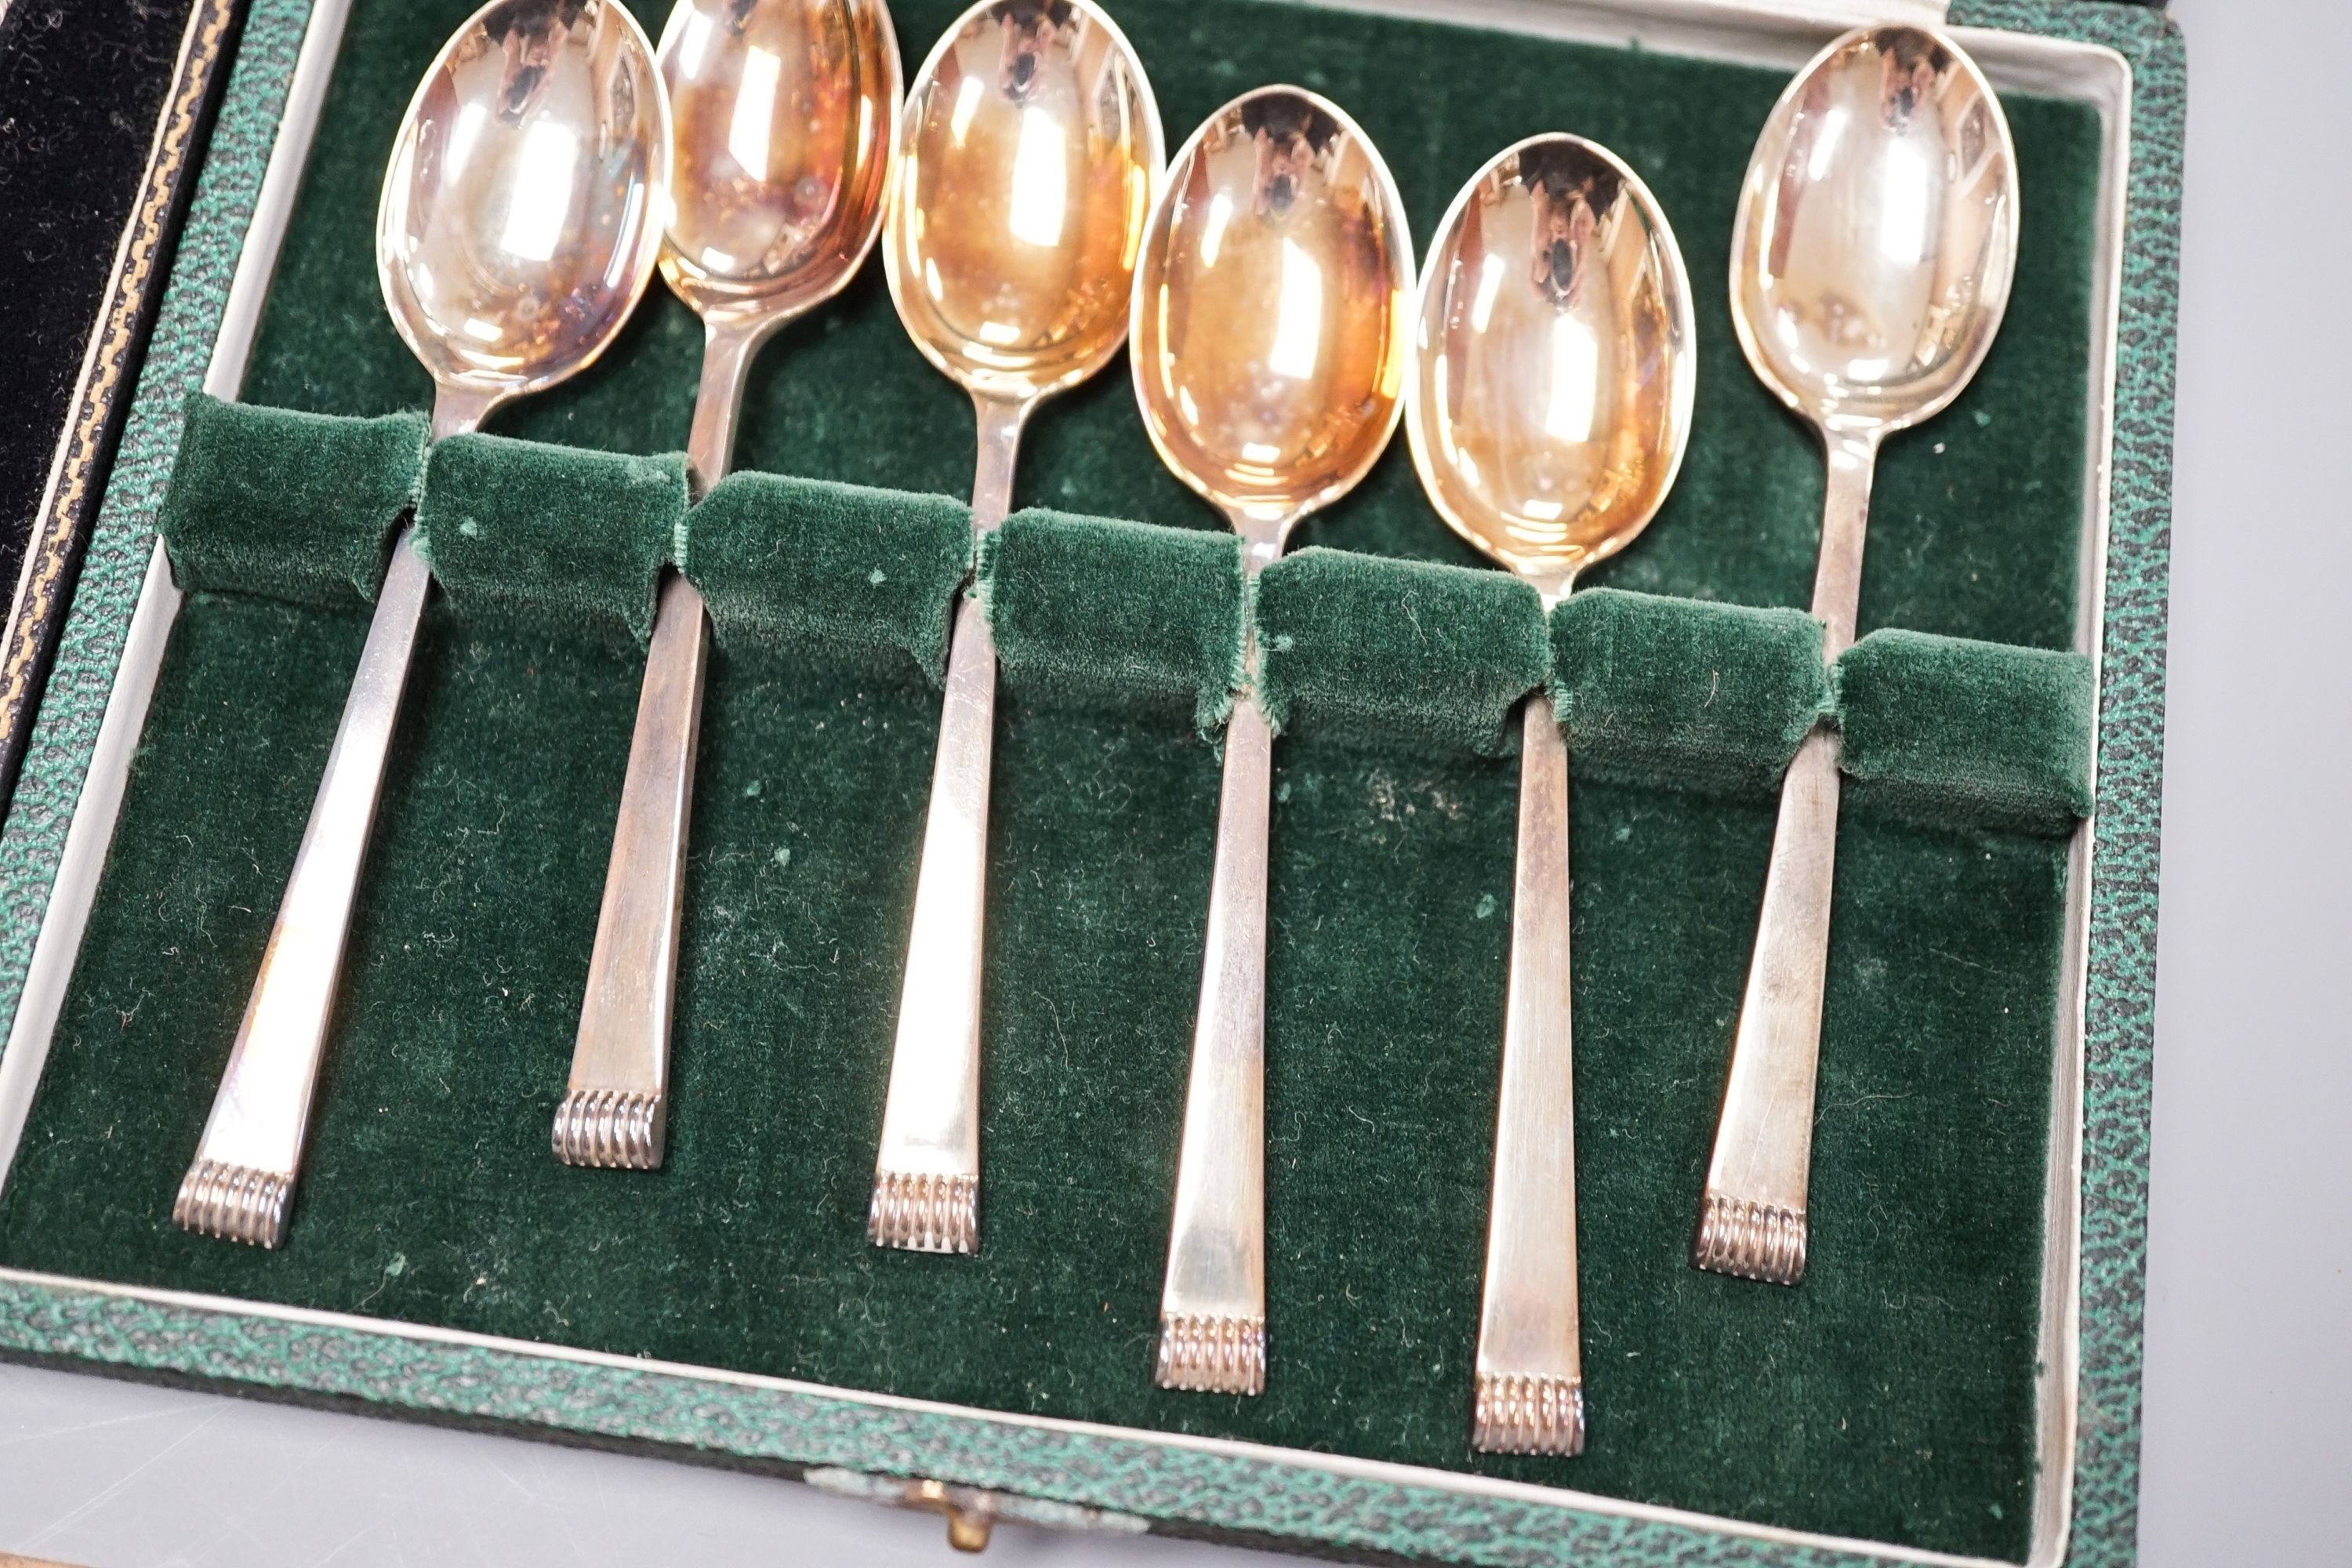 Seven assorted cased sets of English silver tea and coffee spoons, including a set of twelve silver gilt teaspoons, London, 1882 (one set incomplete).